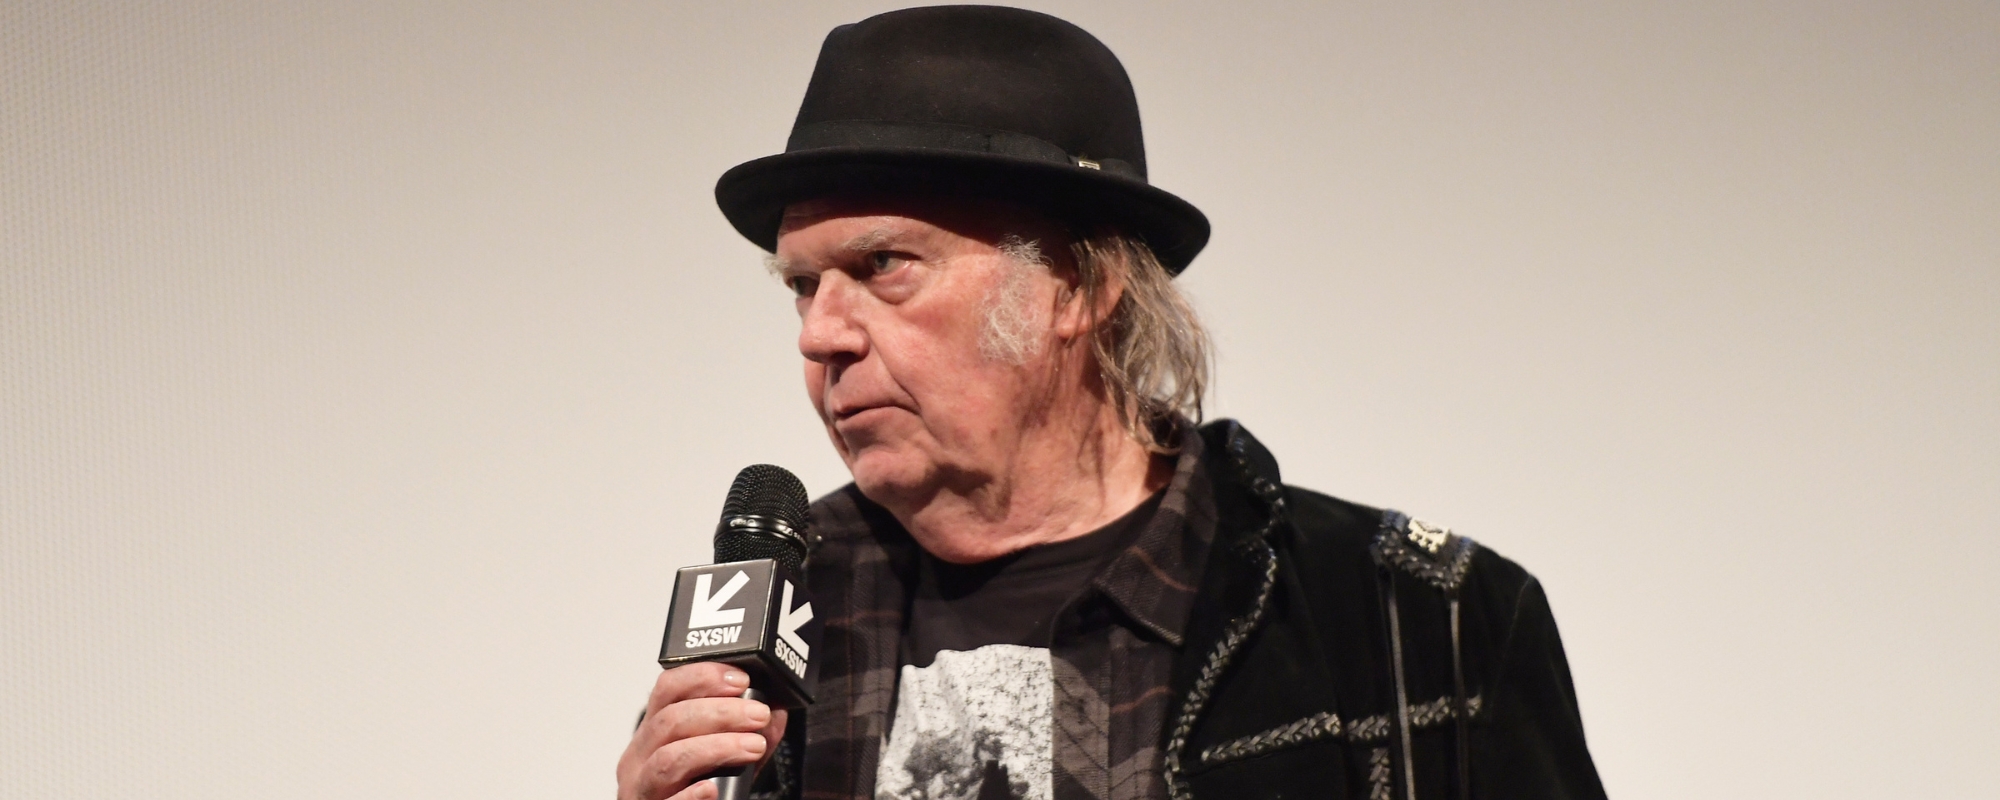 Watch: Neil Young Channels Jimi Hendrix in New Video Featuring “Star-Spangled Banner” Performance